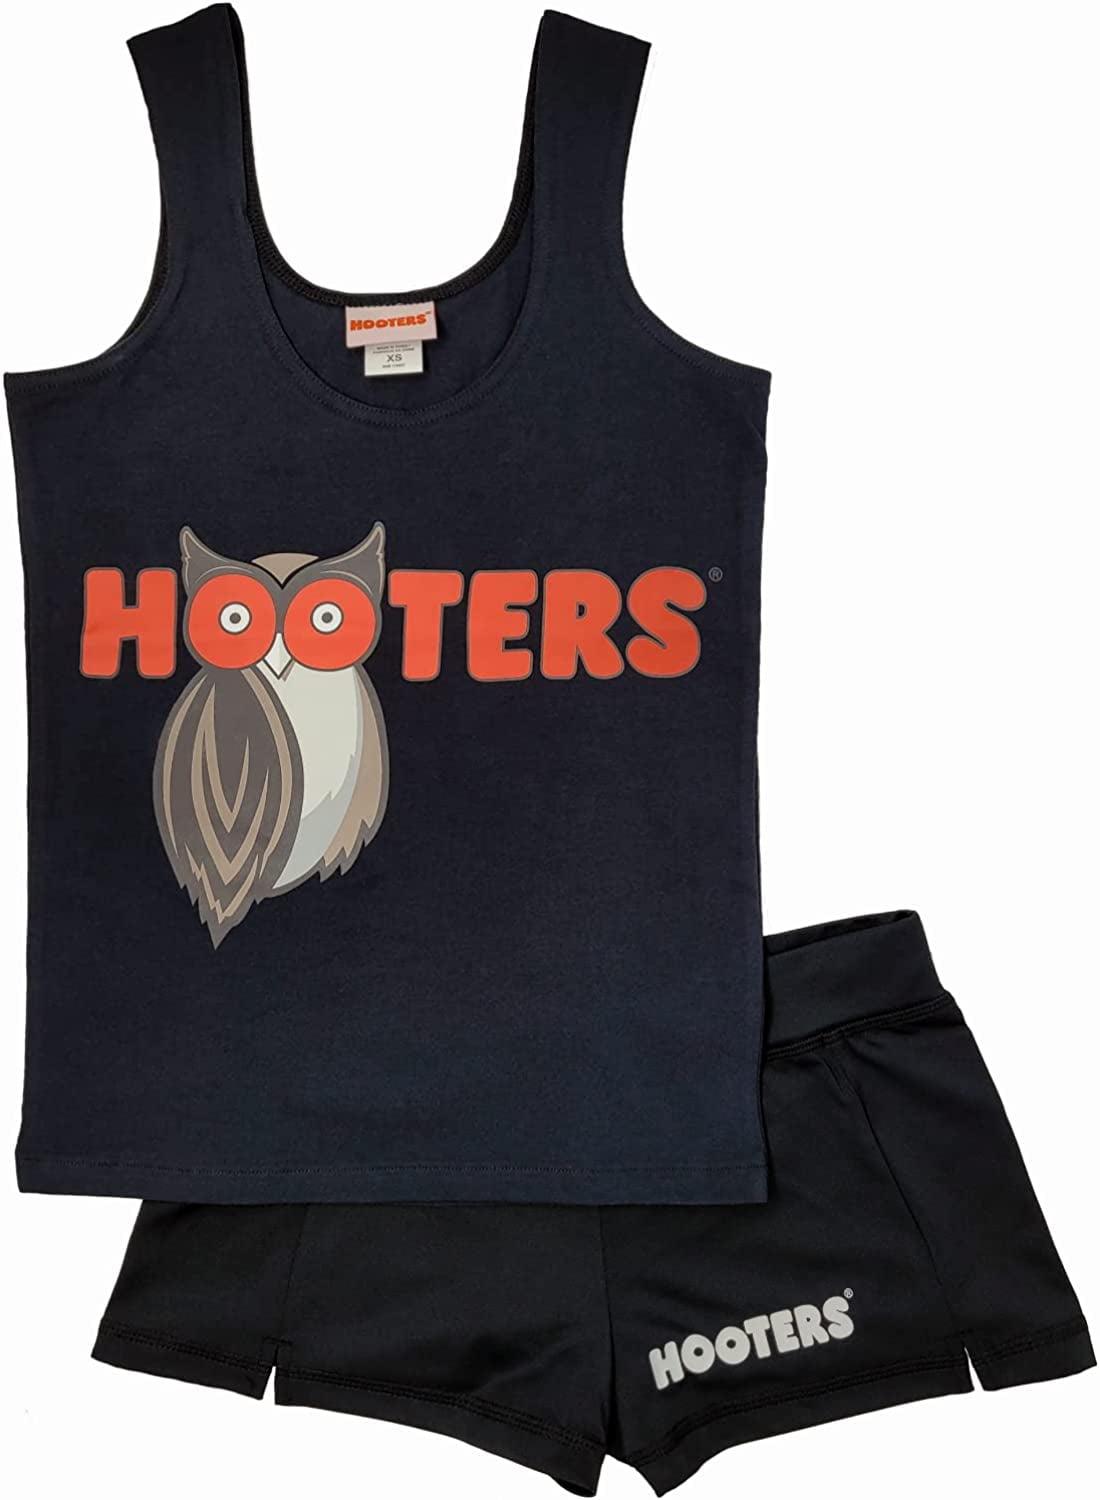 Hooters Outfit for Women Includes White Tank and Orange Short Set  Officially Licensed By Ripple Junction 